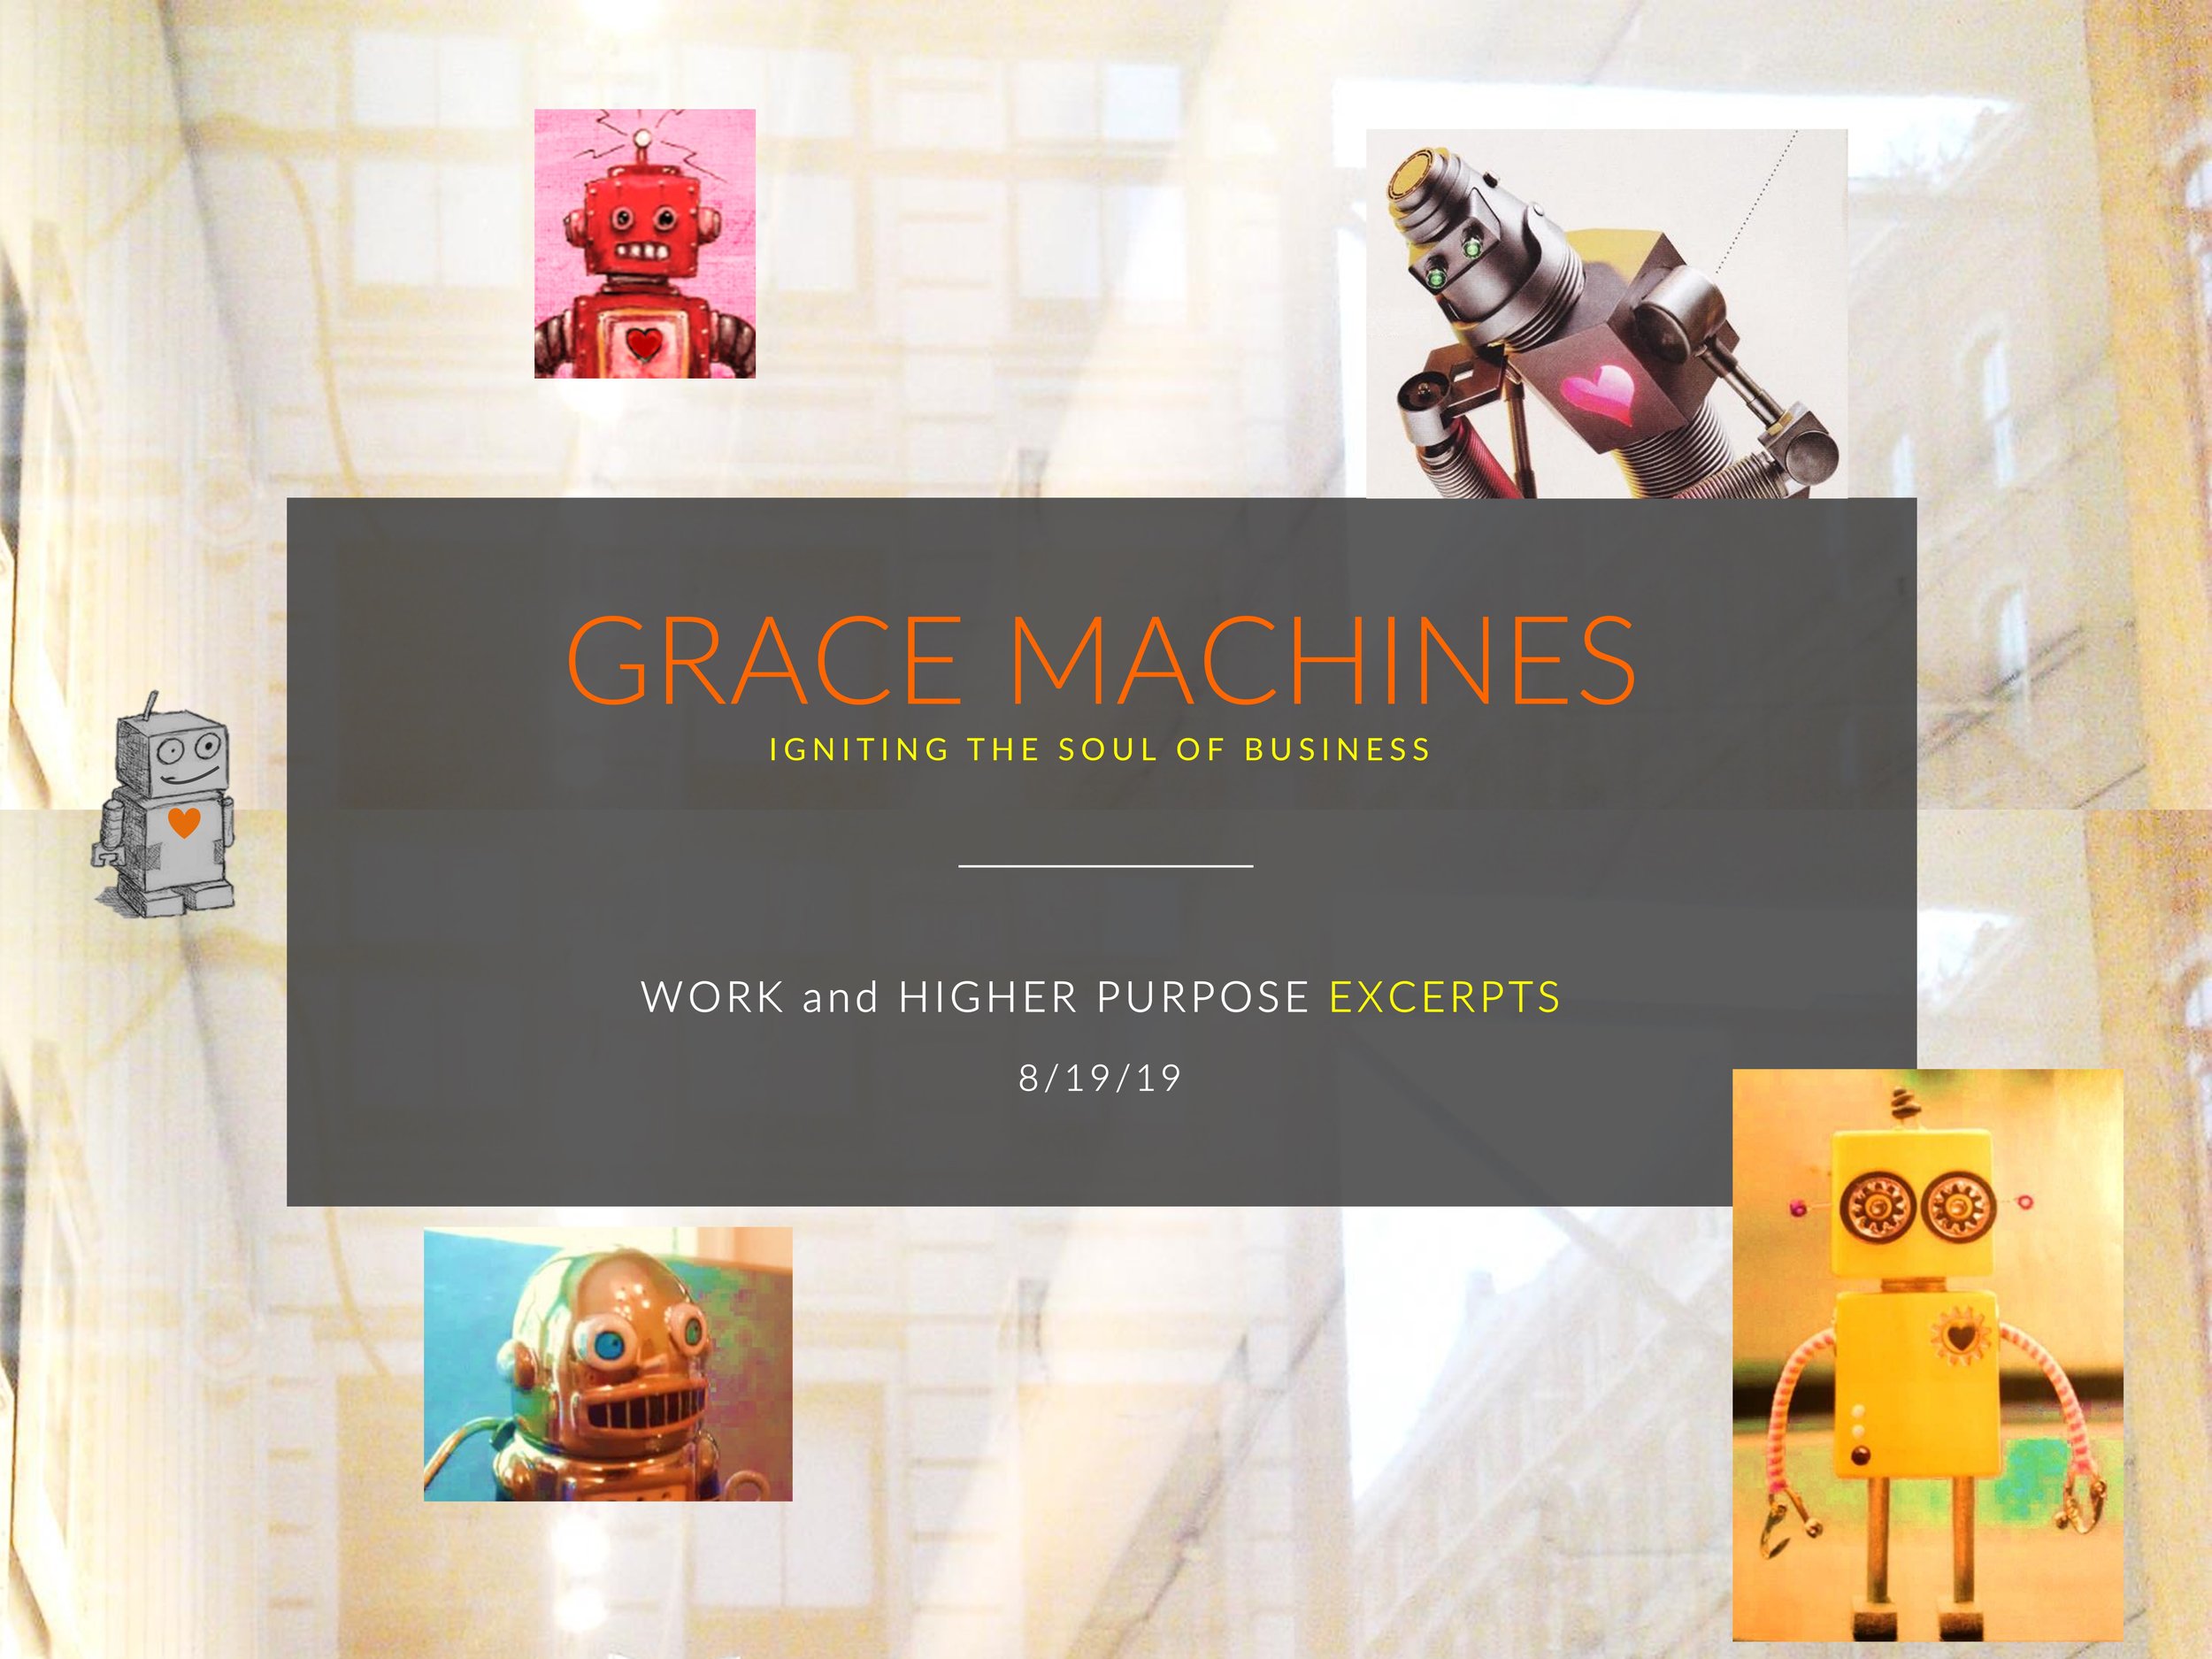 2022_0824 New Page 1 of 2019_0819 Grace Machines Work and Higher Purpose Deck.jpg